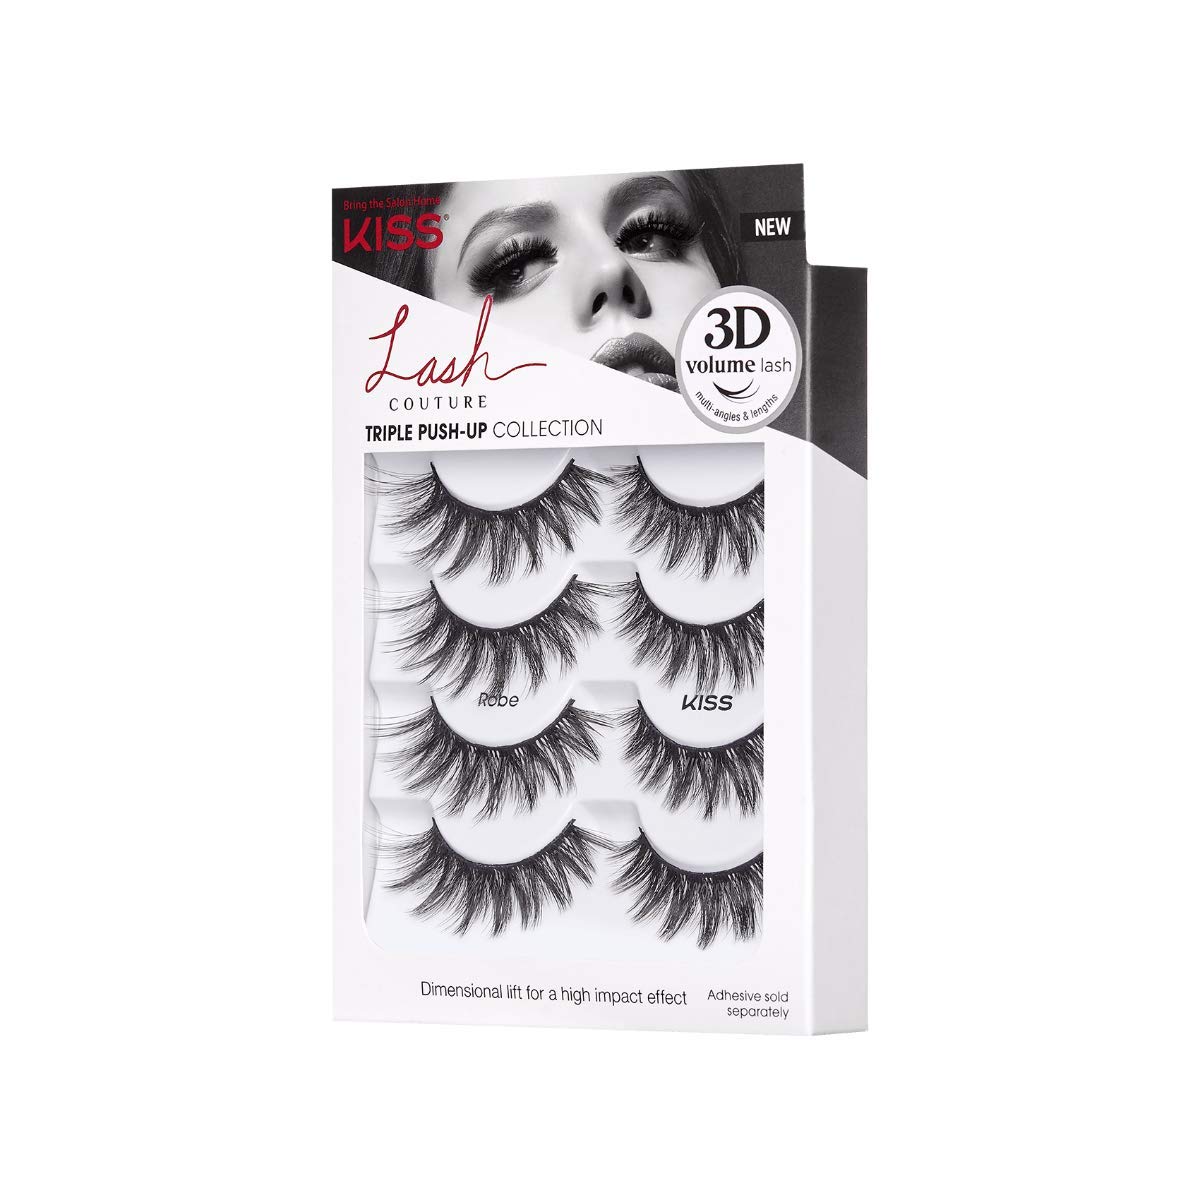 KISS Lash Couture Triple Push Up Collection Multipack, 3D Volume False Eyelashes, Triple Design Technology, Multi-Angles & Lengths, Cruelty-Free, Contact Lens Friendly, Reusable, Style Robe, 4 Pairs